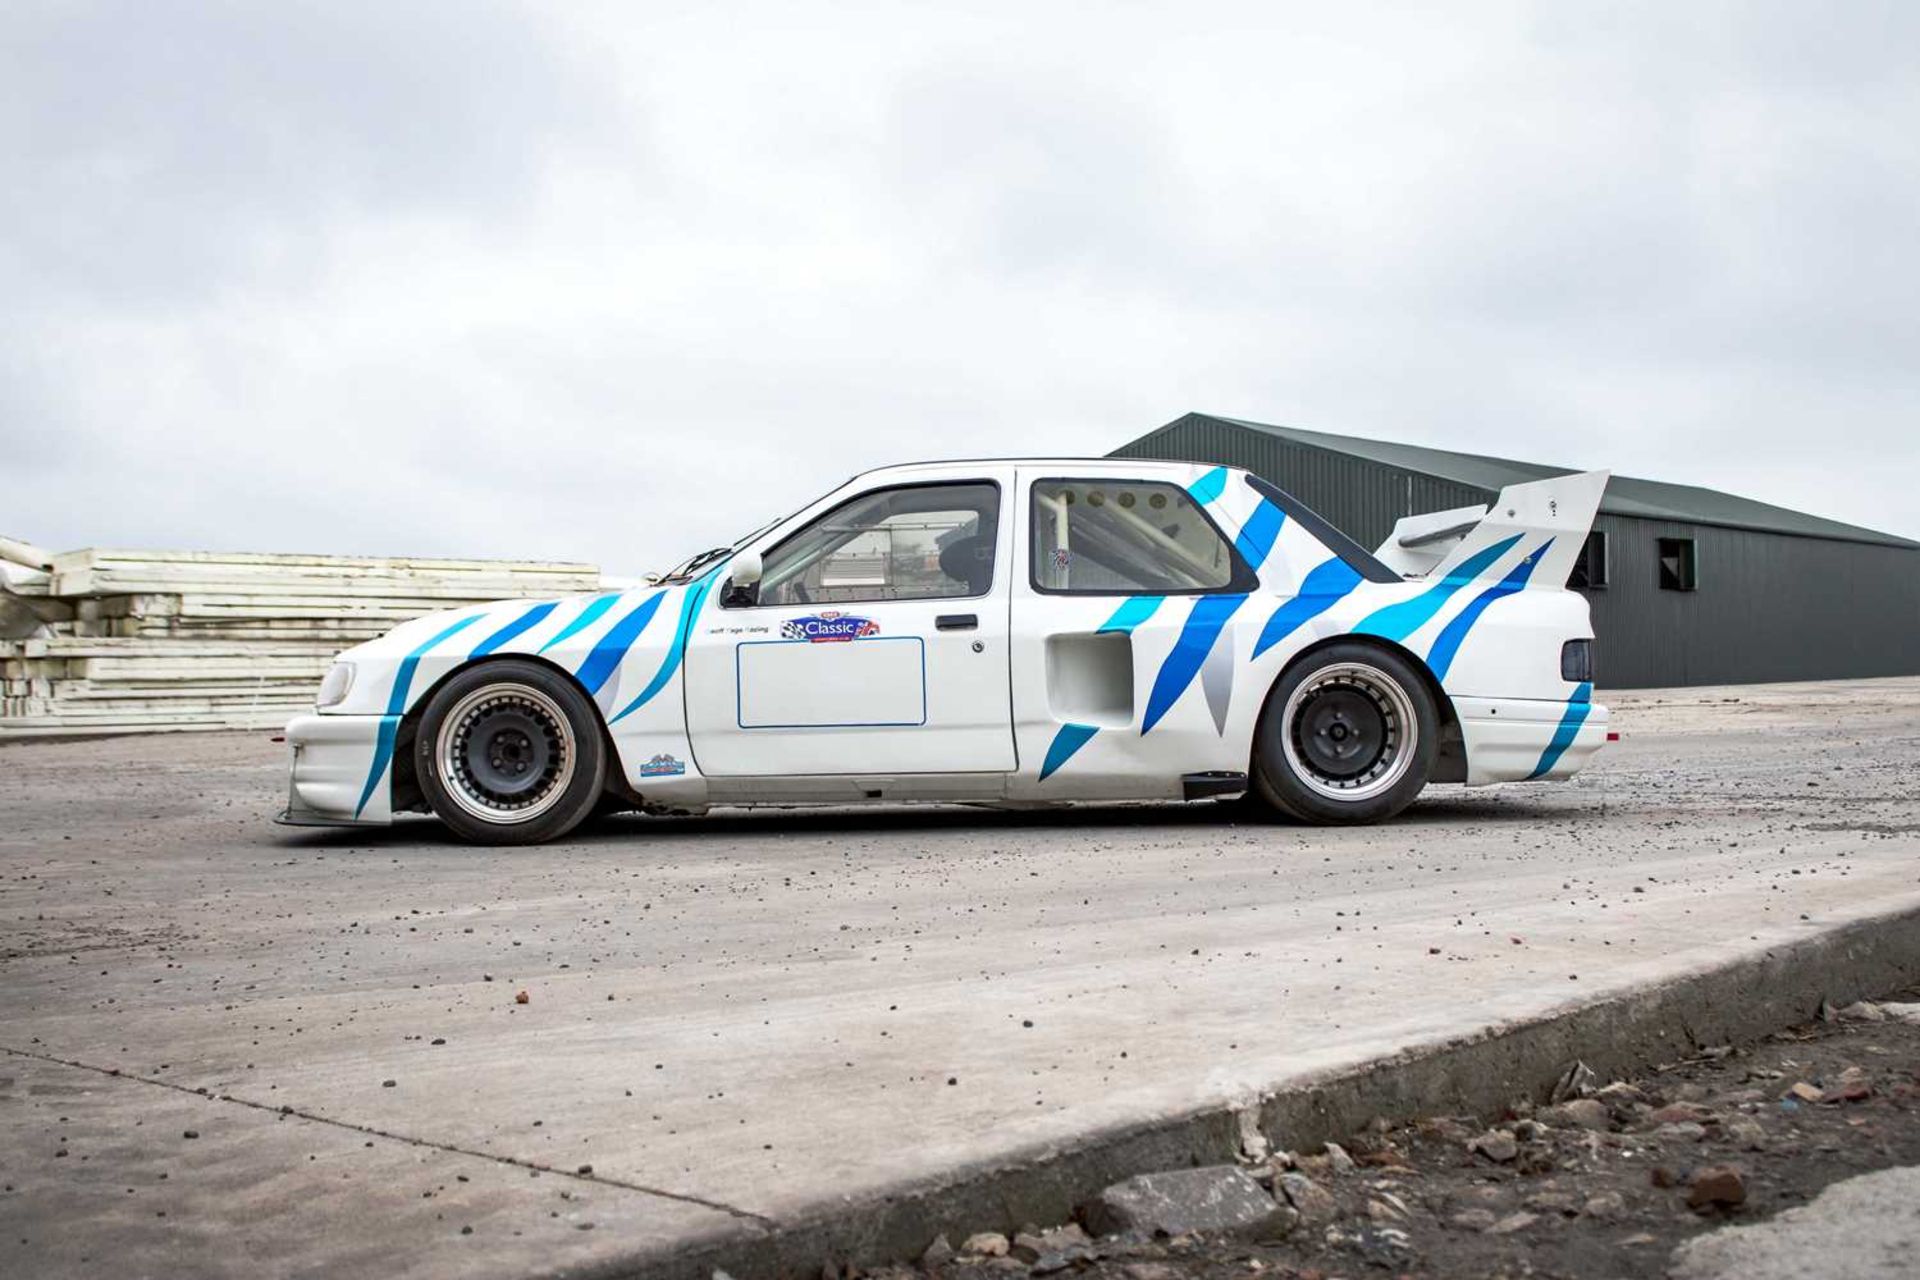 1996 Ford Sierra Cosworth - Image 5 of 100